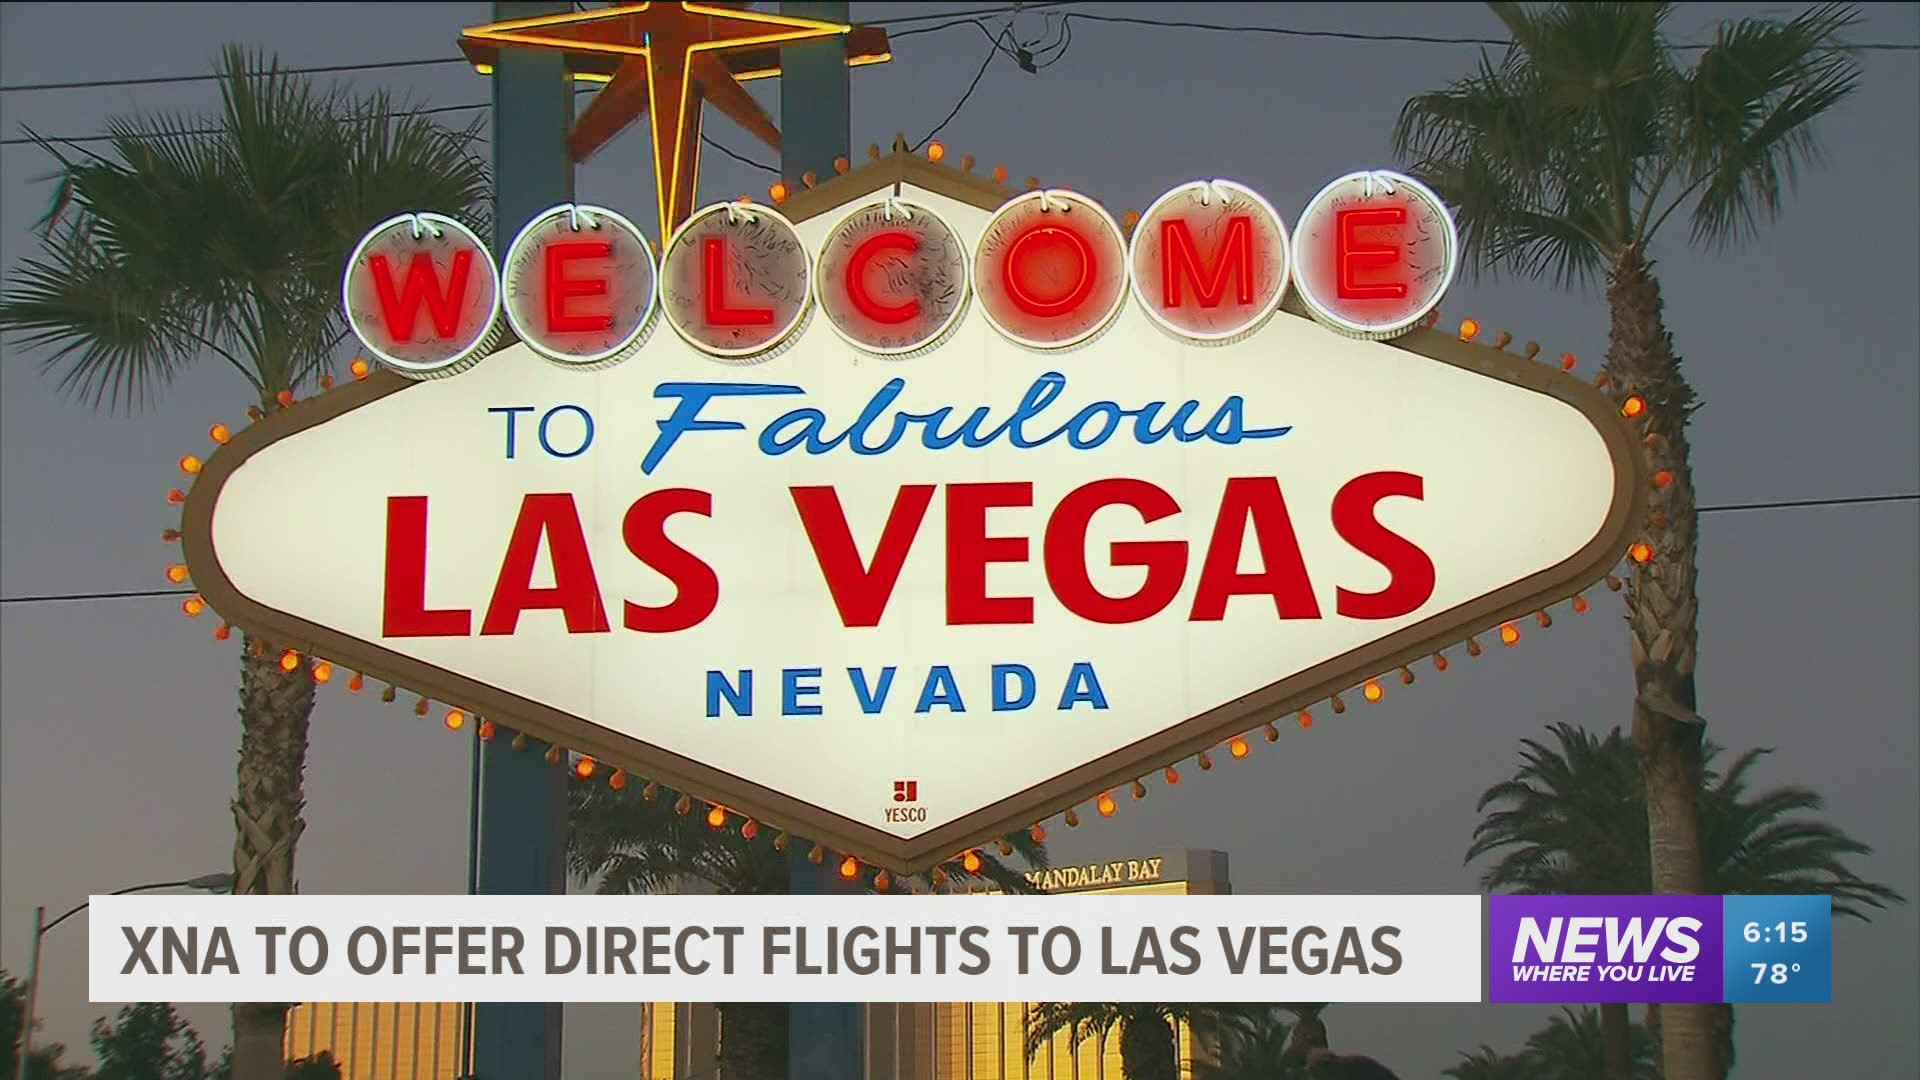 Frontier Airlines announced they would begin offering non-stop flights to Las Vegas from XNA beginning Aug. 13.